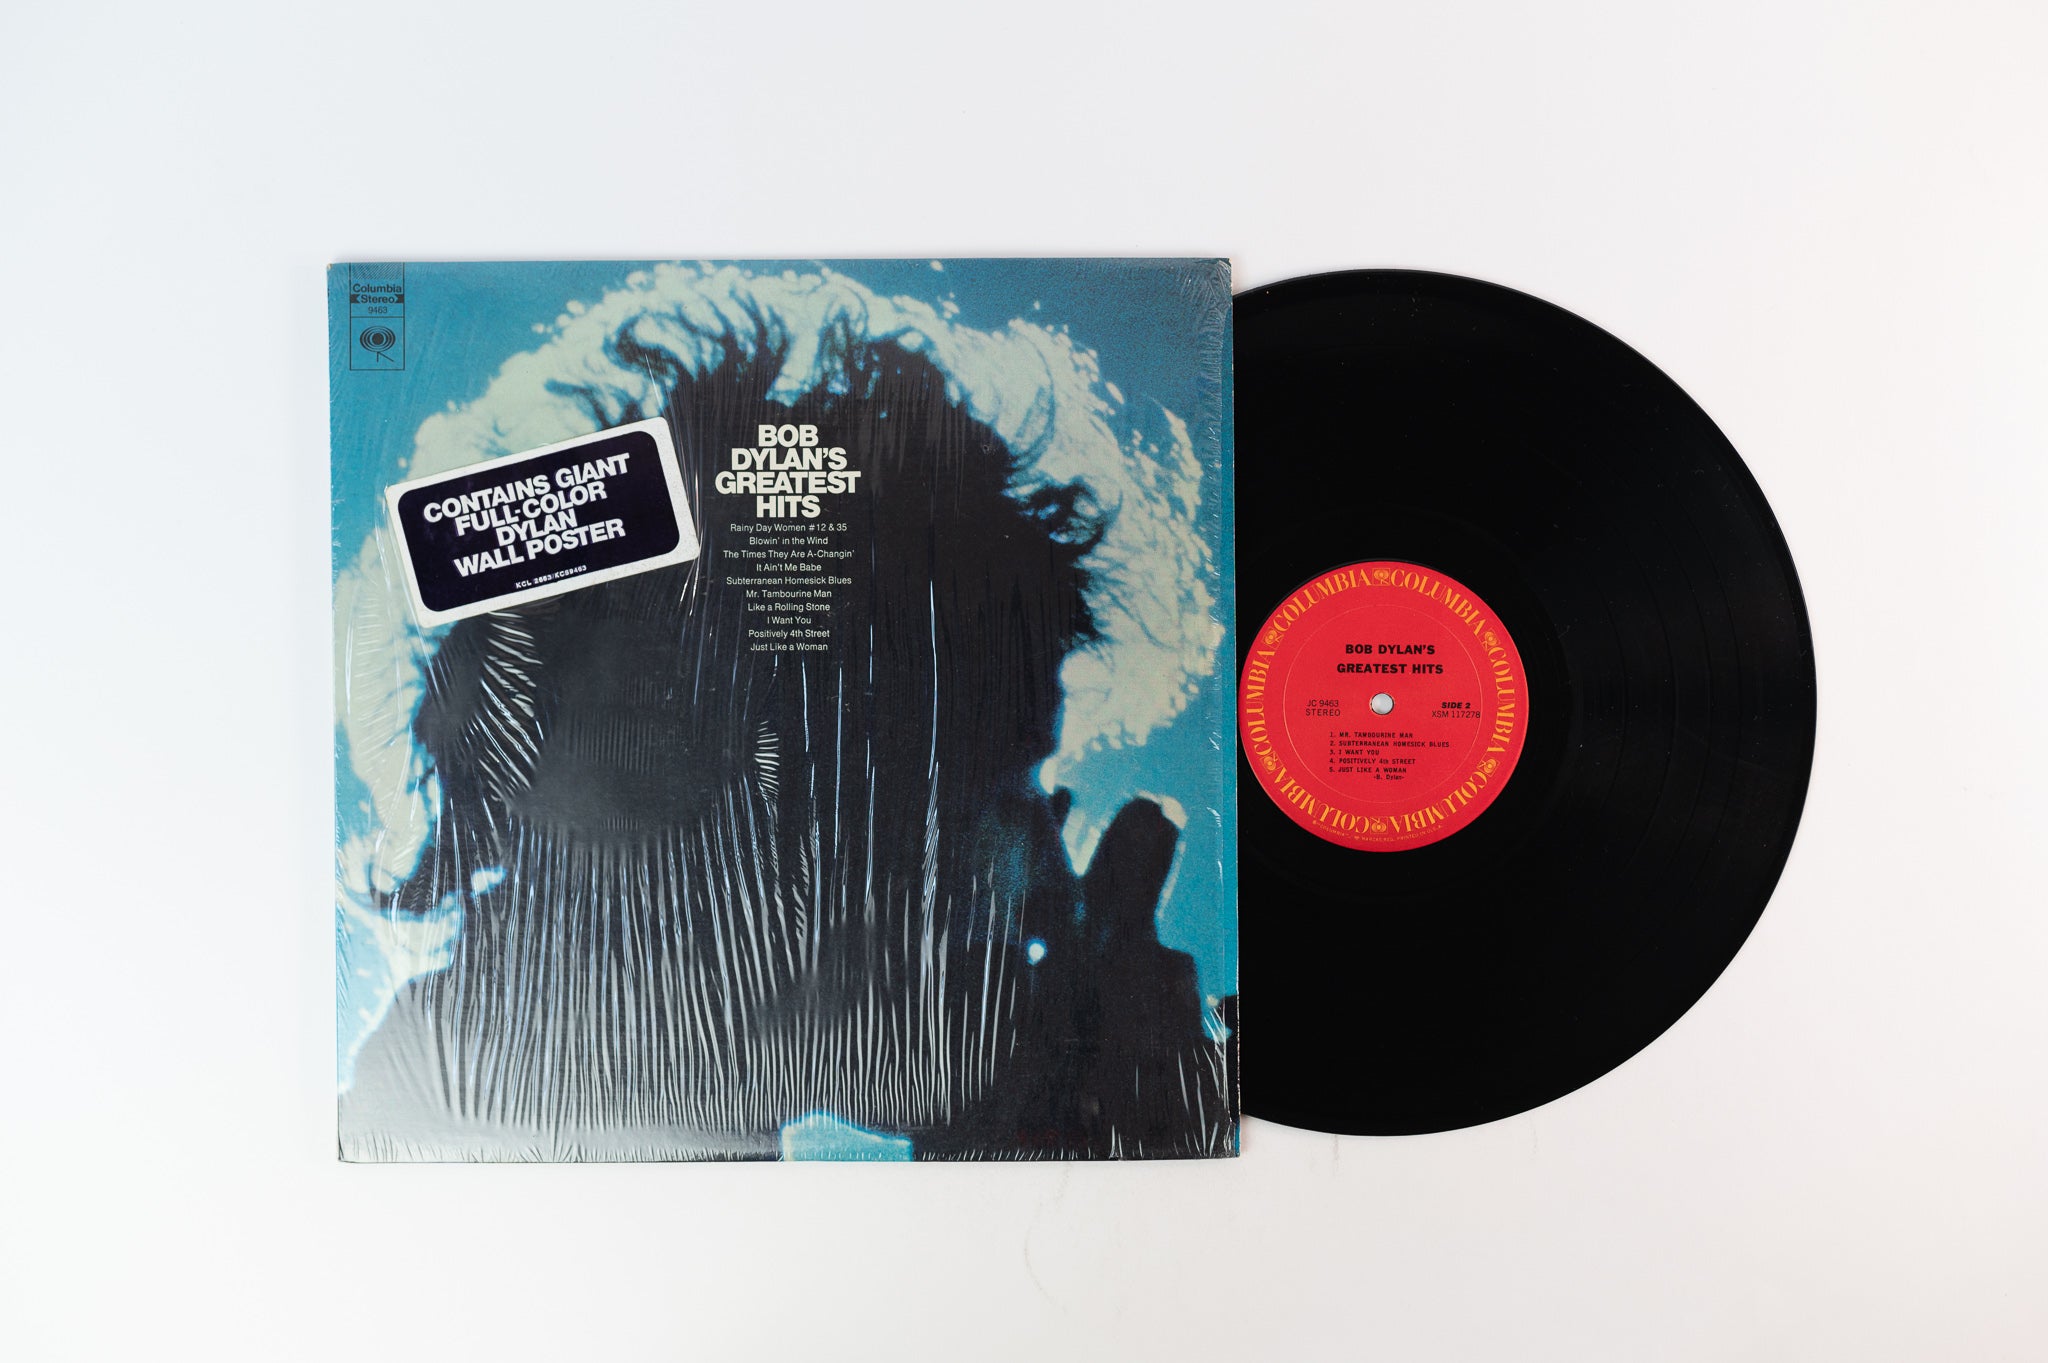 Bob Dylan - Bob Dylan's Greatest Hits on Columbia with Poster